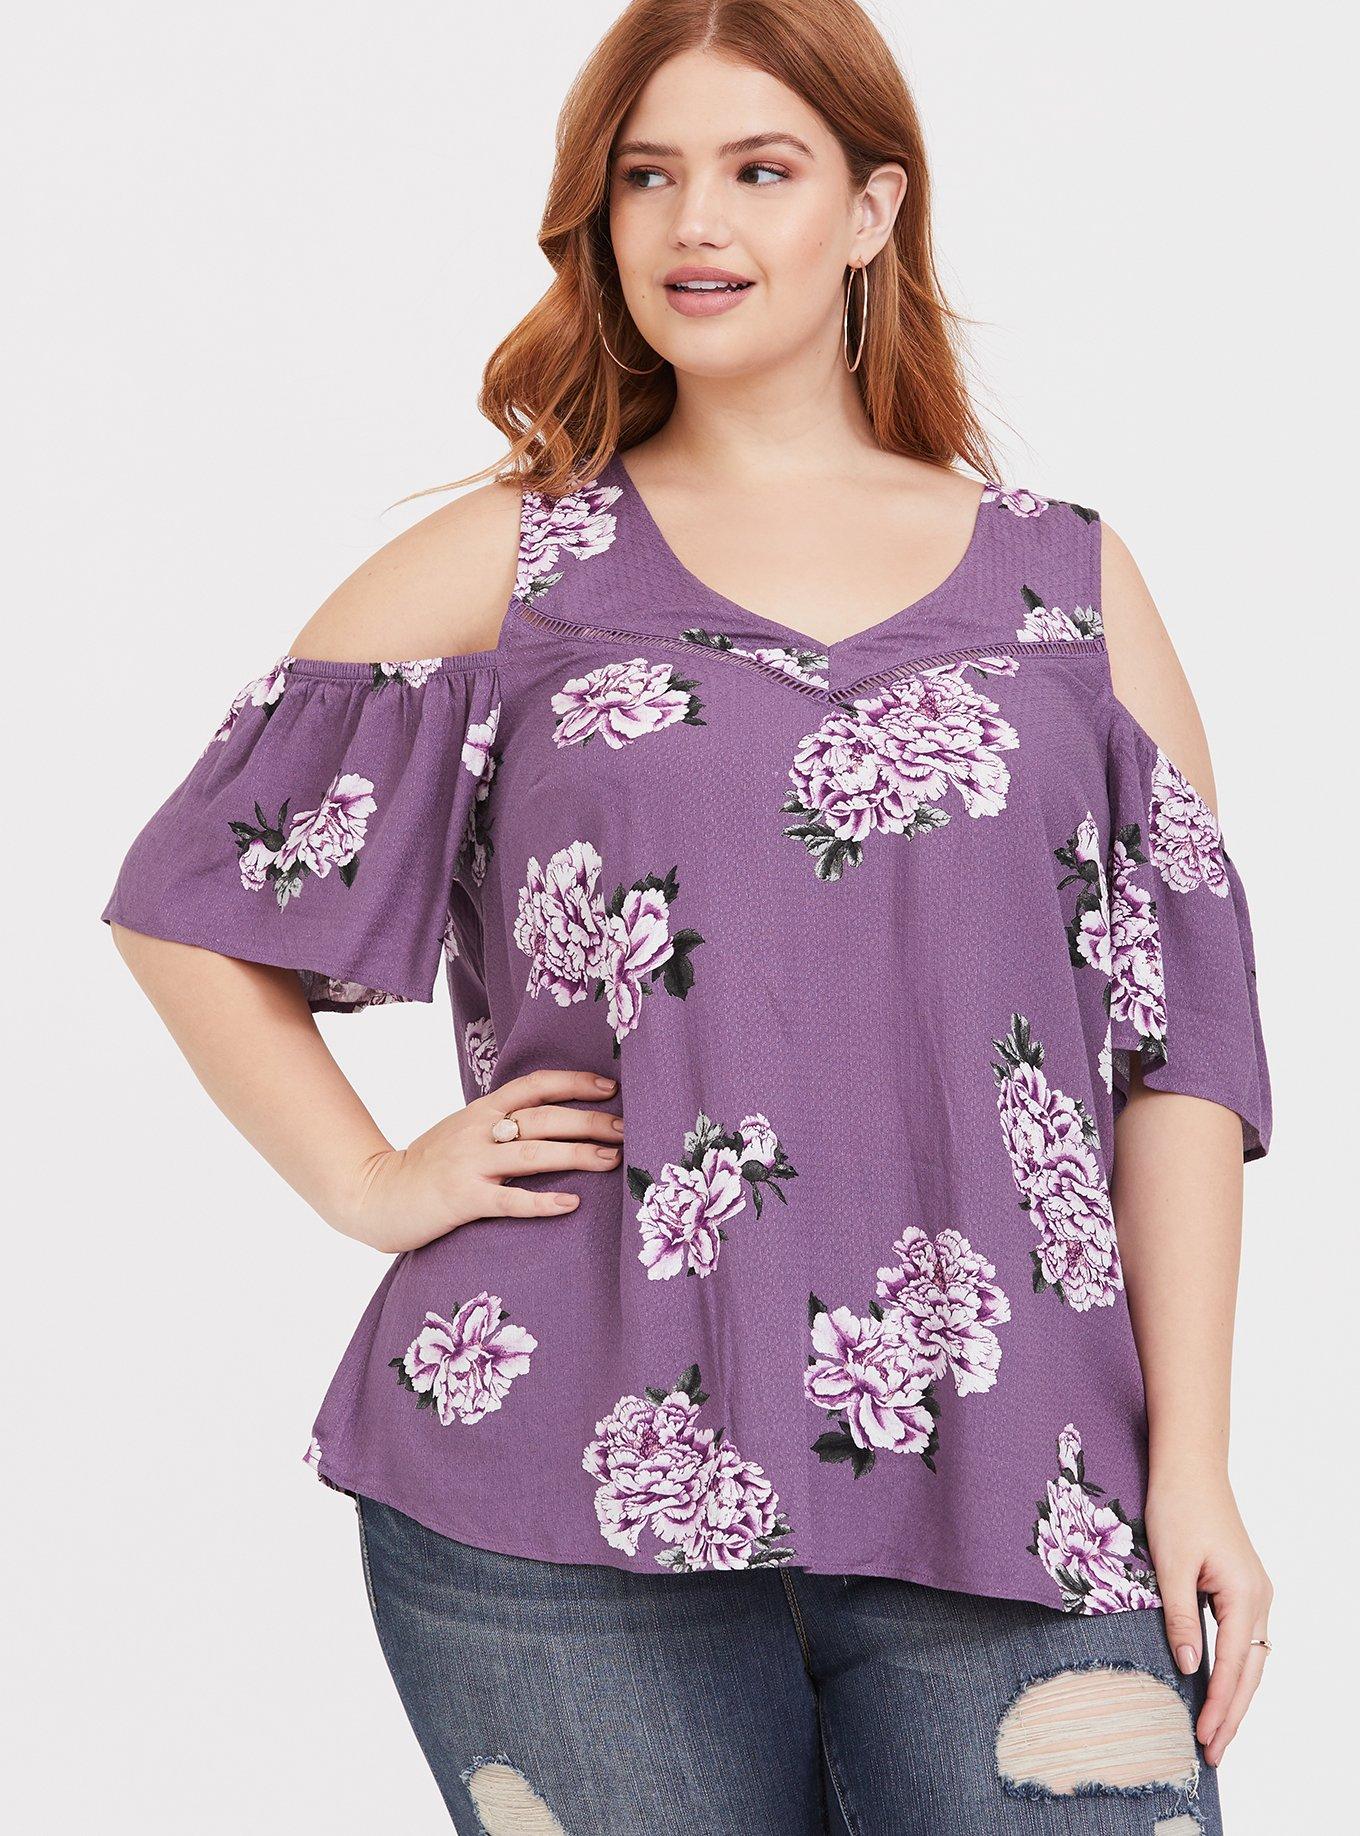 Plus Size - Textured Woven With Eyelet Trim Cold Shoulder Top - Torrid